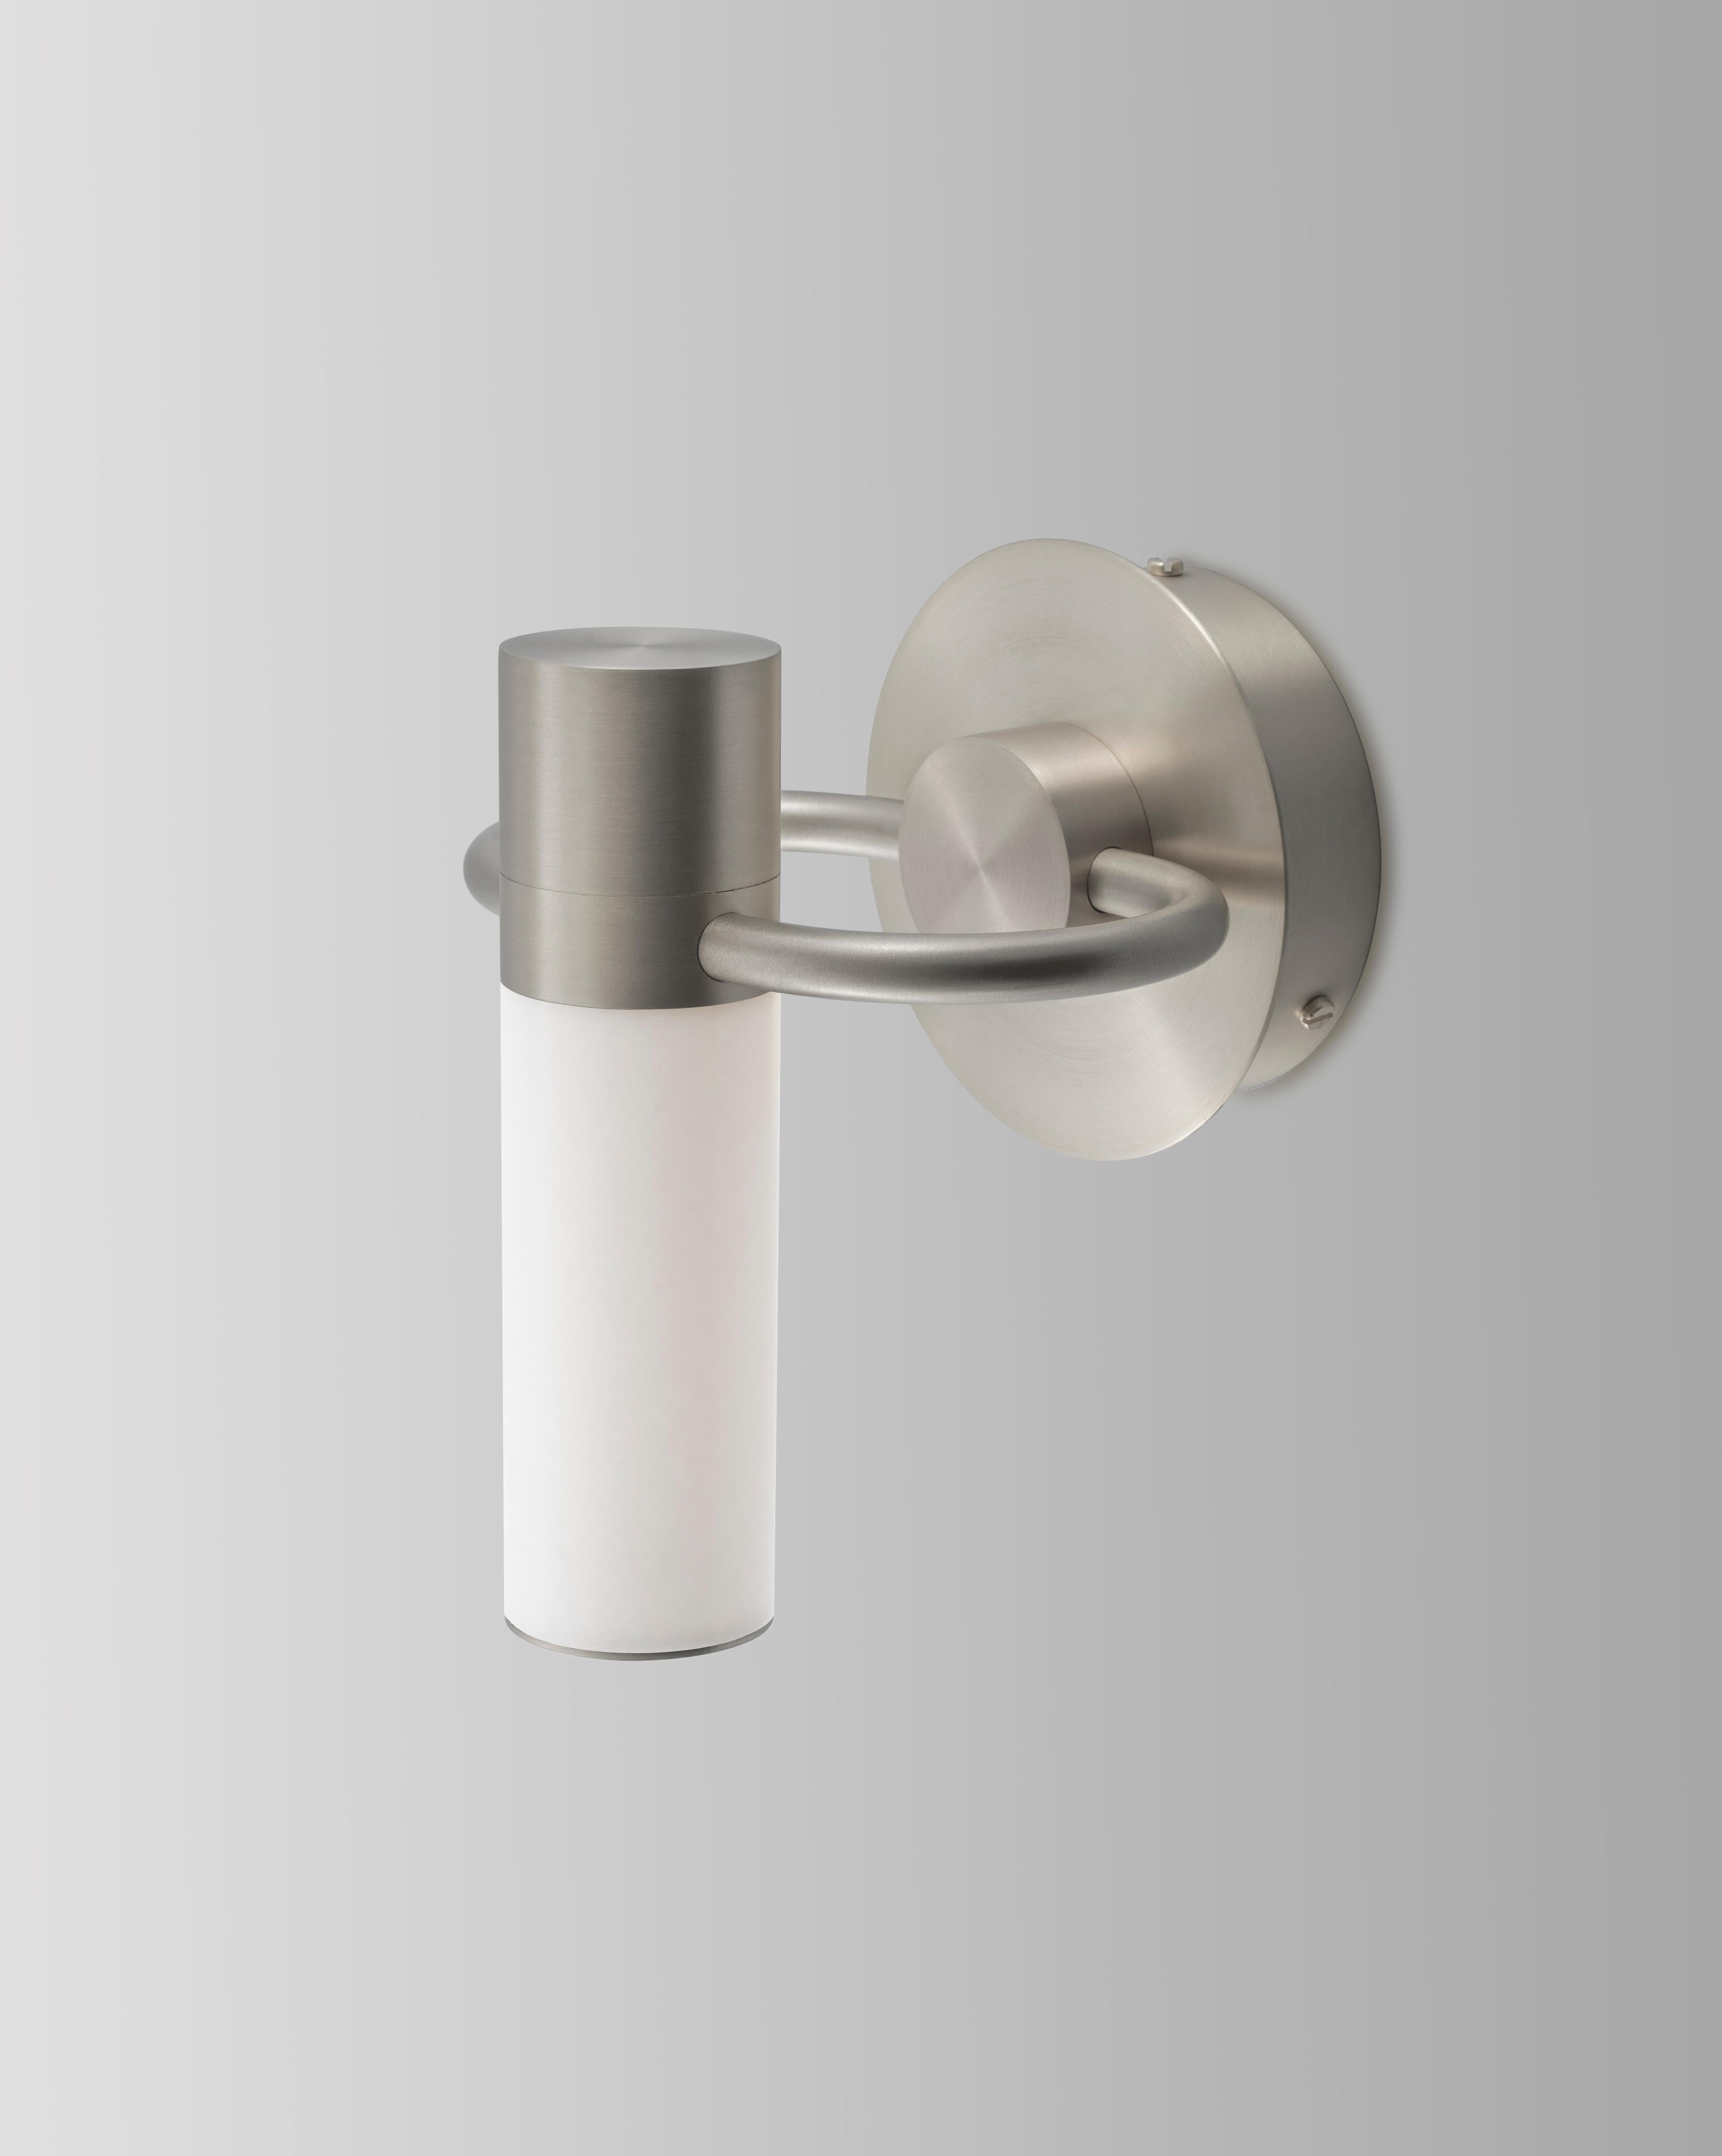 IP storm satin nickel wall light by Emilie Cathelineau
Dimensions: D15.5 x W15.5 X H19 cm
Materials: Solid brass, Satin nickel, White Polycarbonate.
Others finishes are available. 

All our lamps can be wired according to each country. If sold